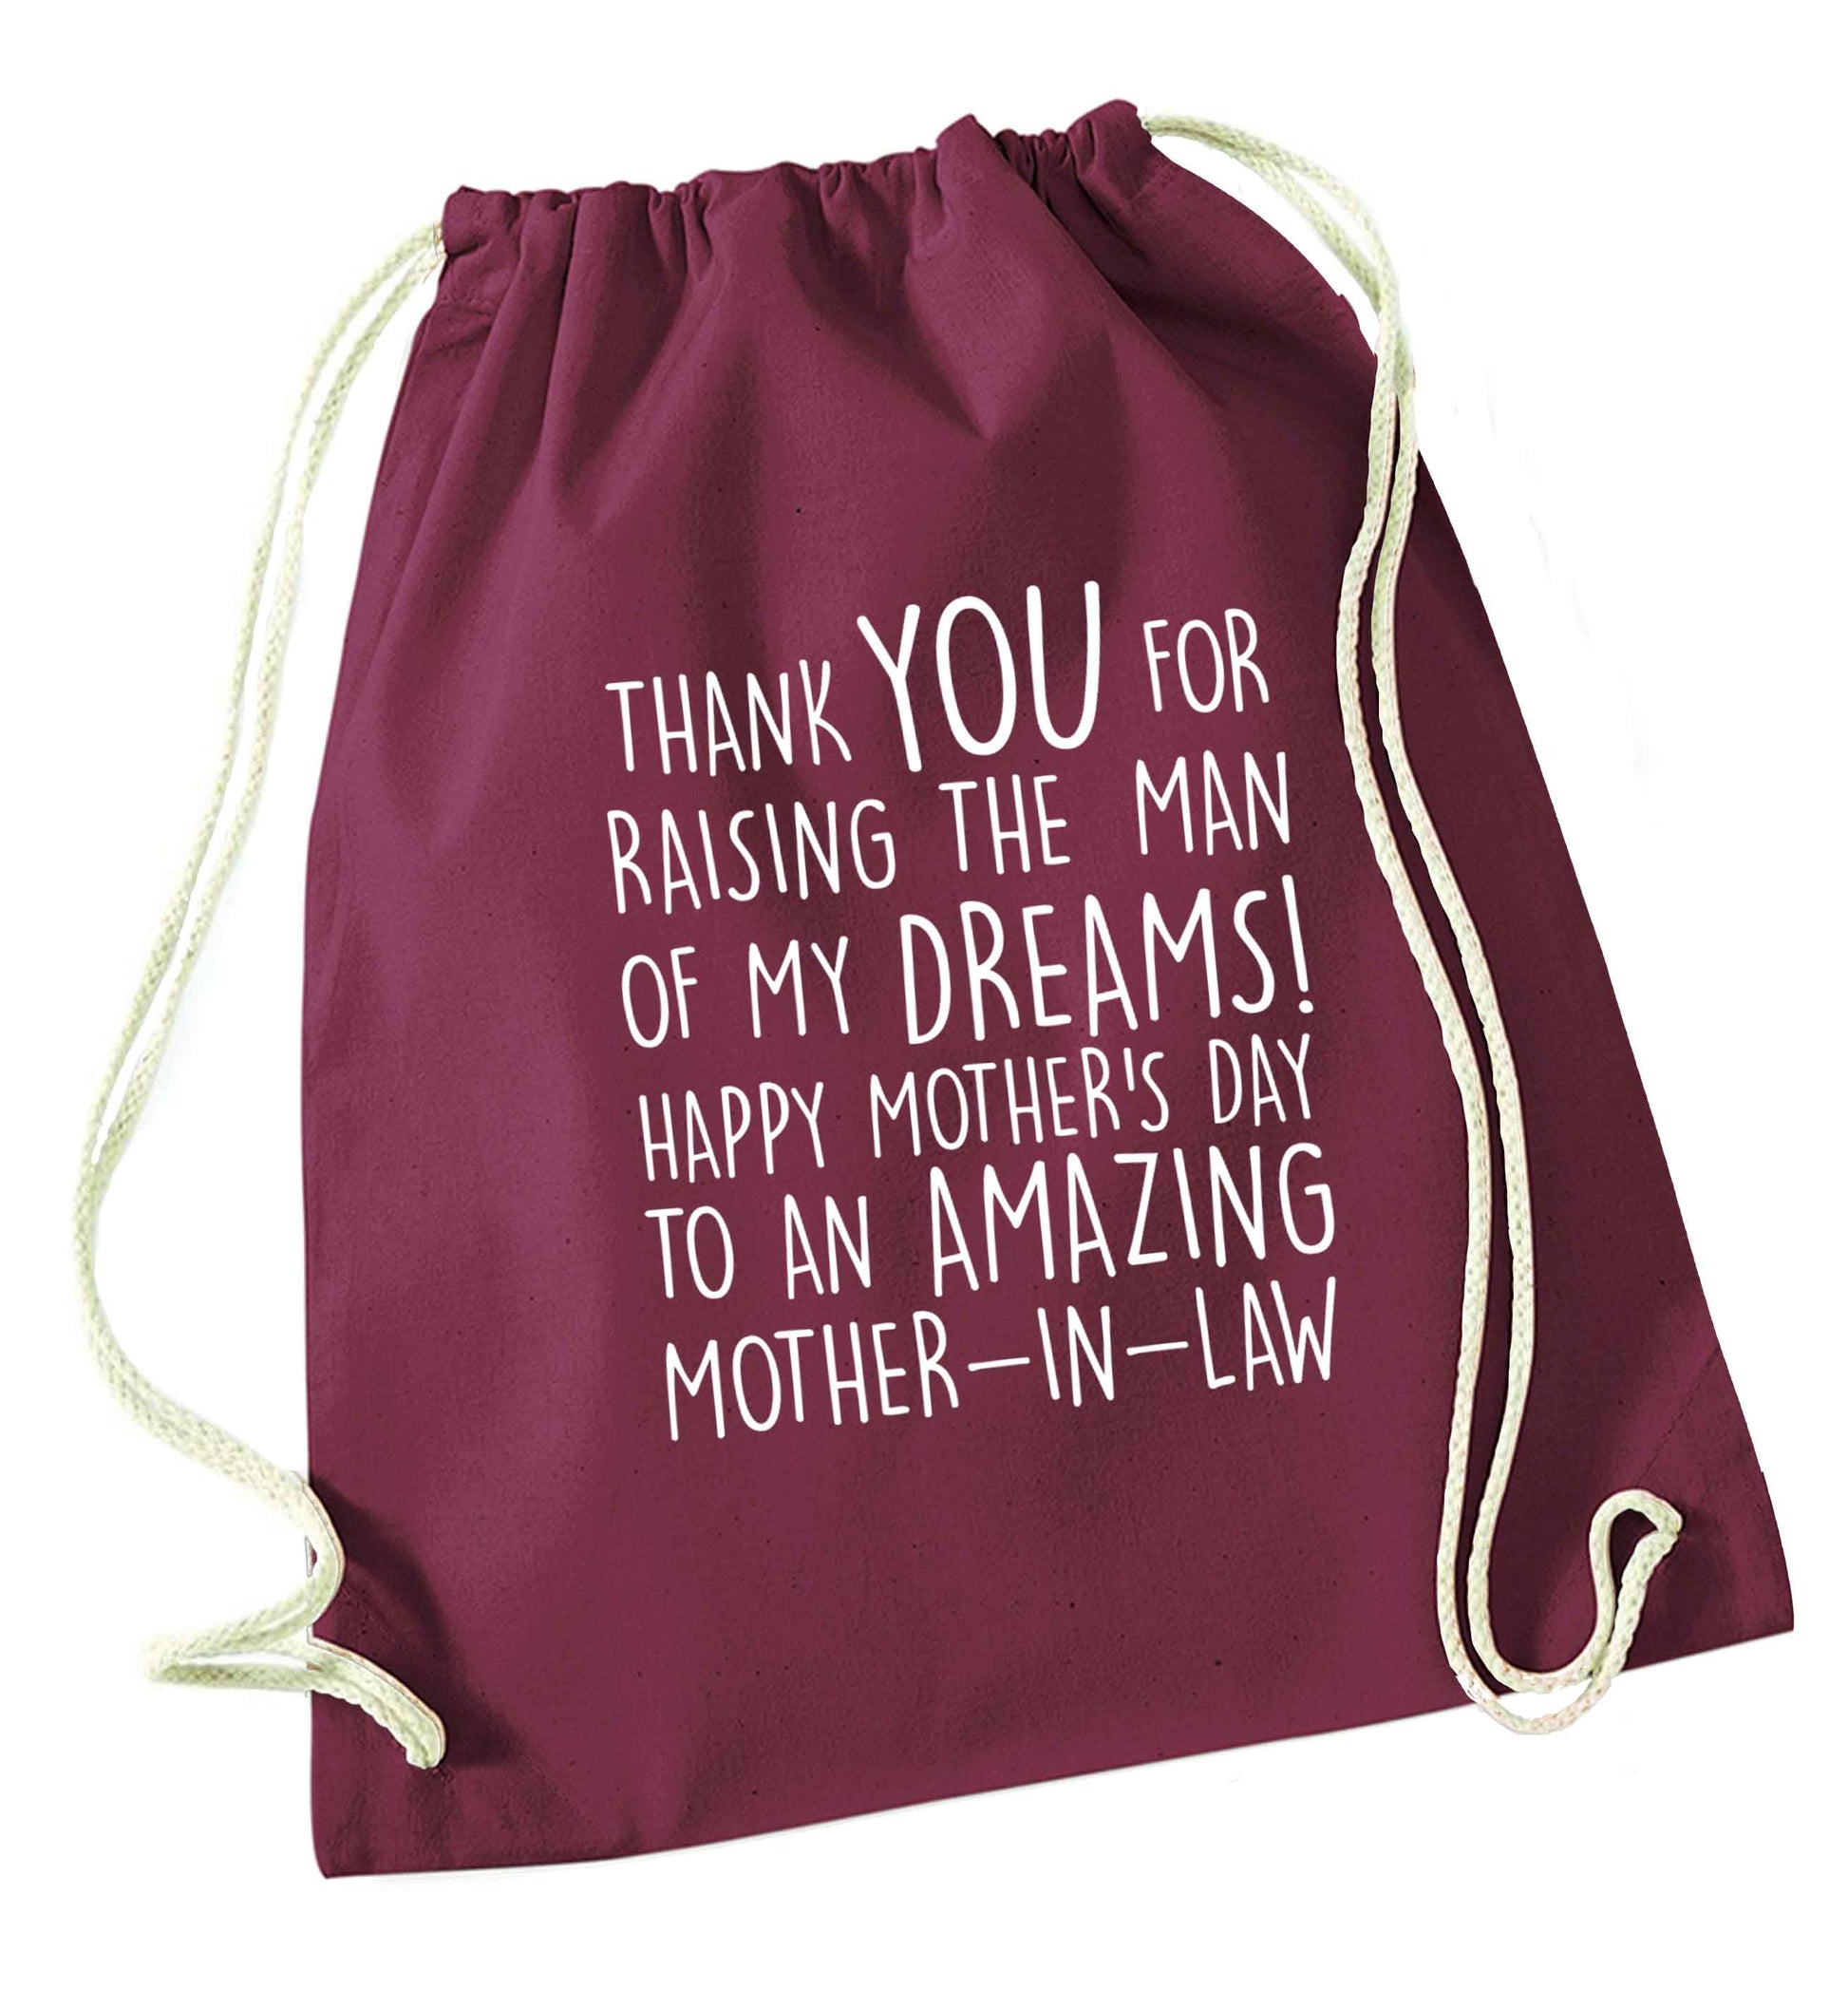 Raising the man of my dreams mother's day mother-in-law maroon drawstring bag